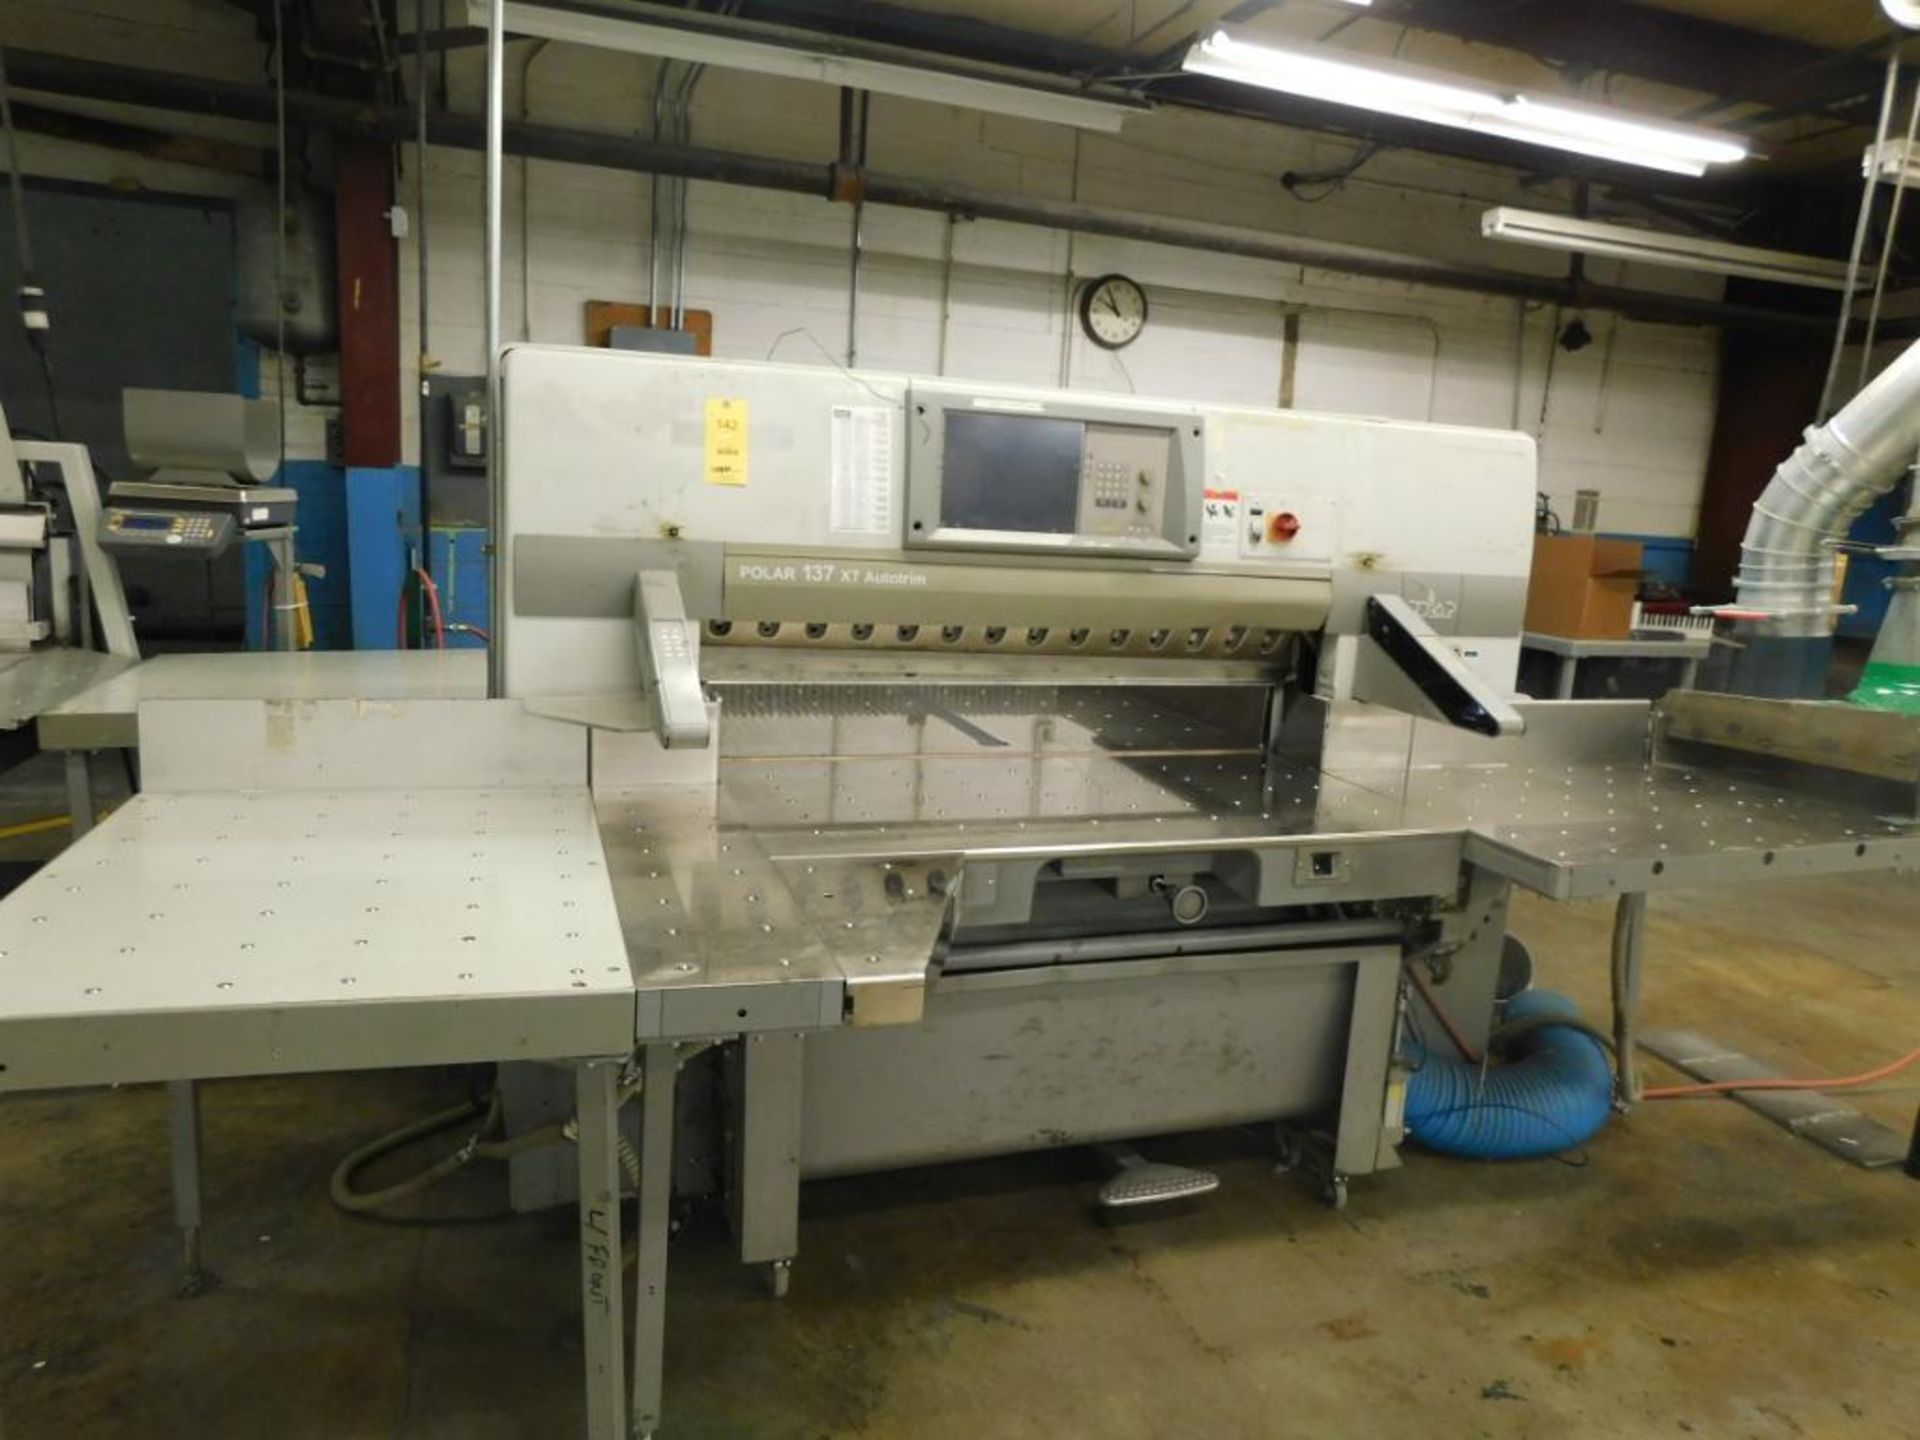 LOT: 2005 Polar 137XT-AT 54 in. Paper Cutter System, S/N 7541321, with Auto Trim, Rear Loading Table